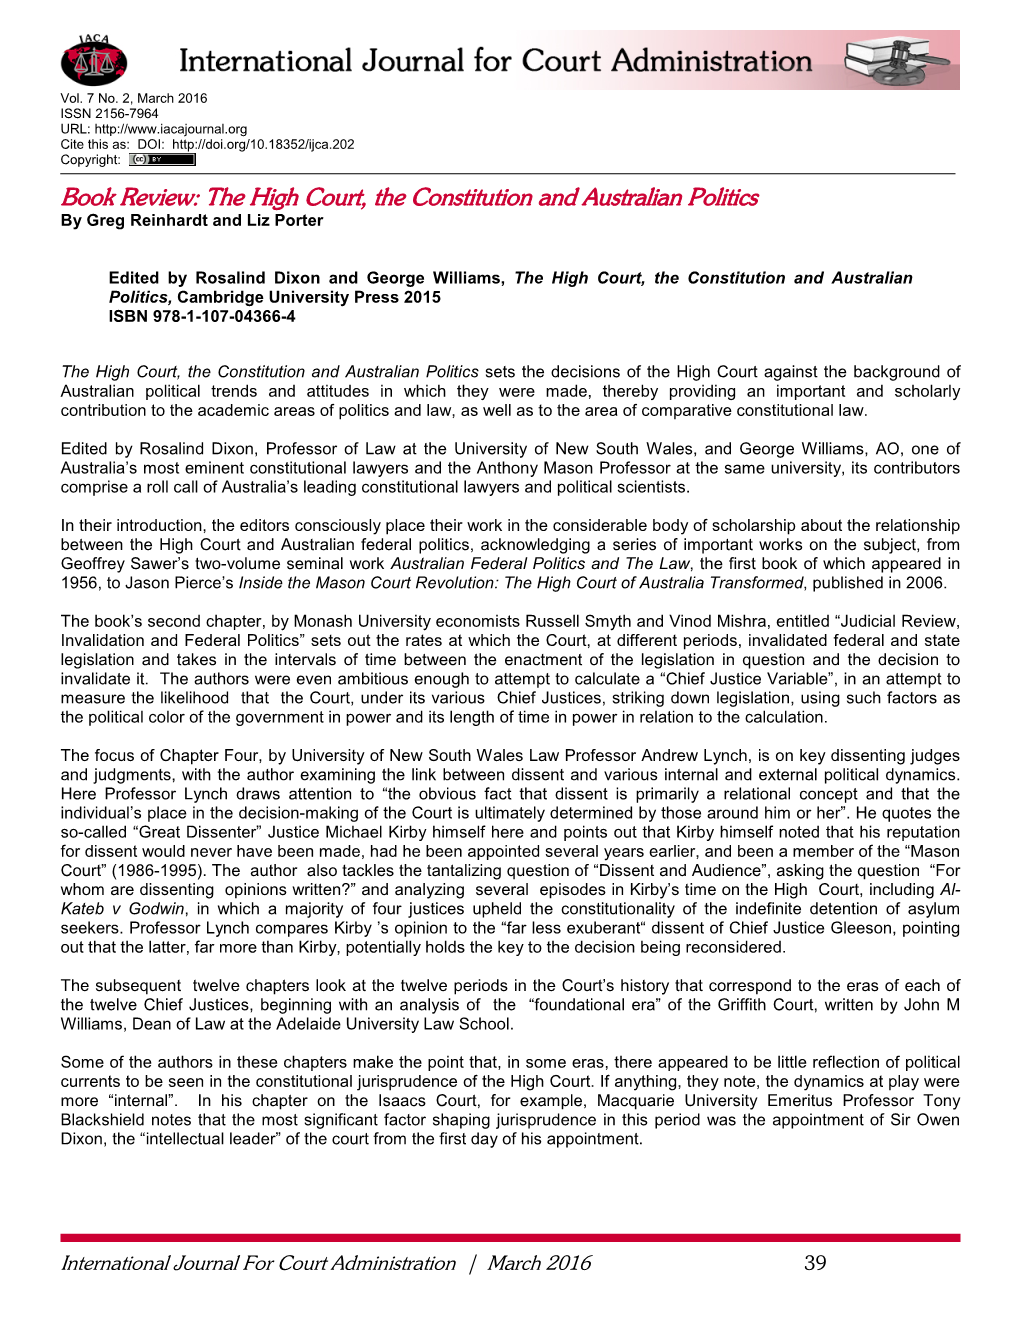 The High Court, the Constitution and Australian Politics by Greg Reinhardt and Liz Porter